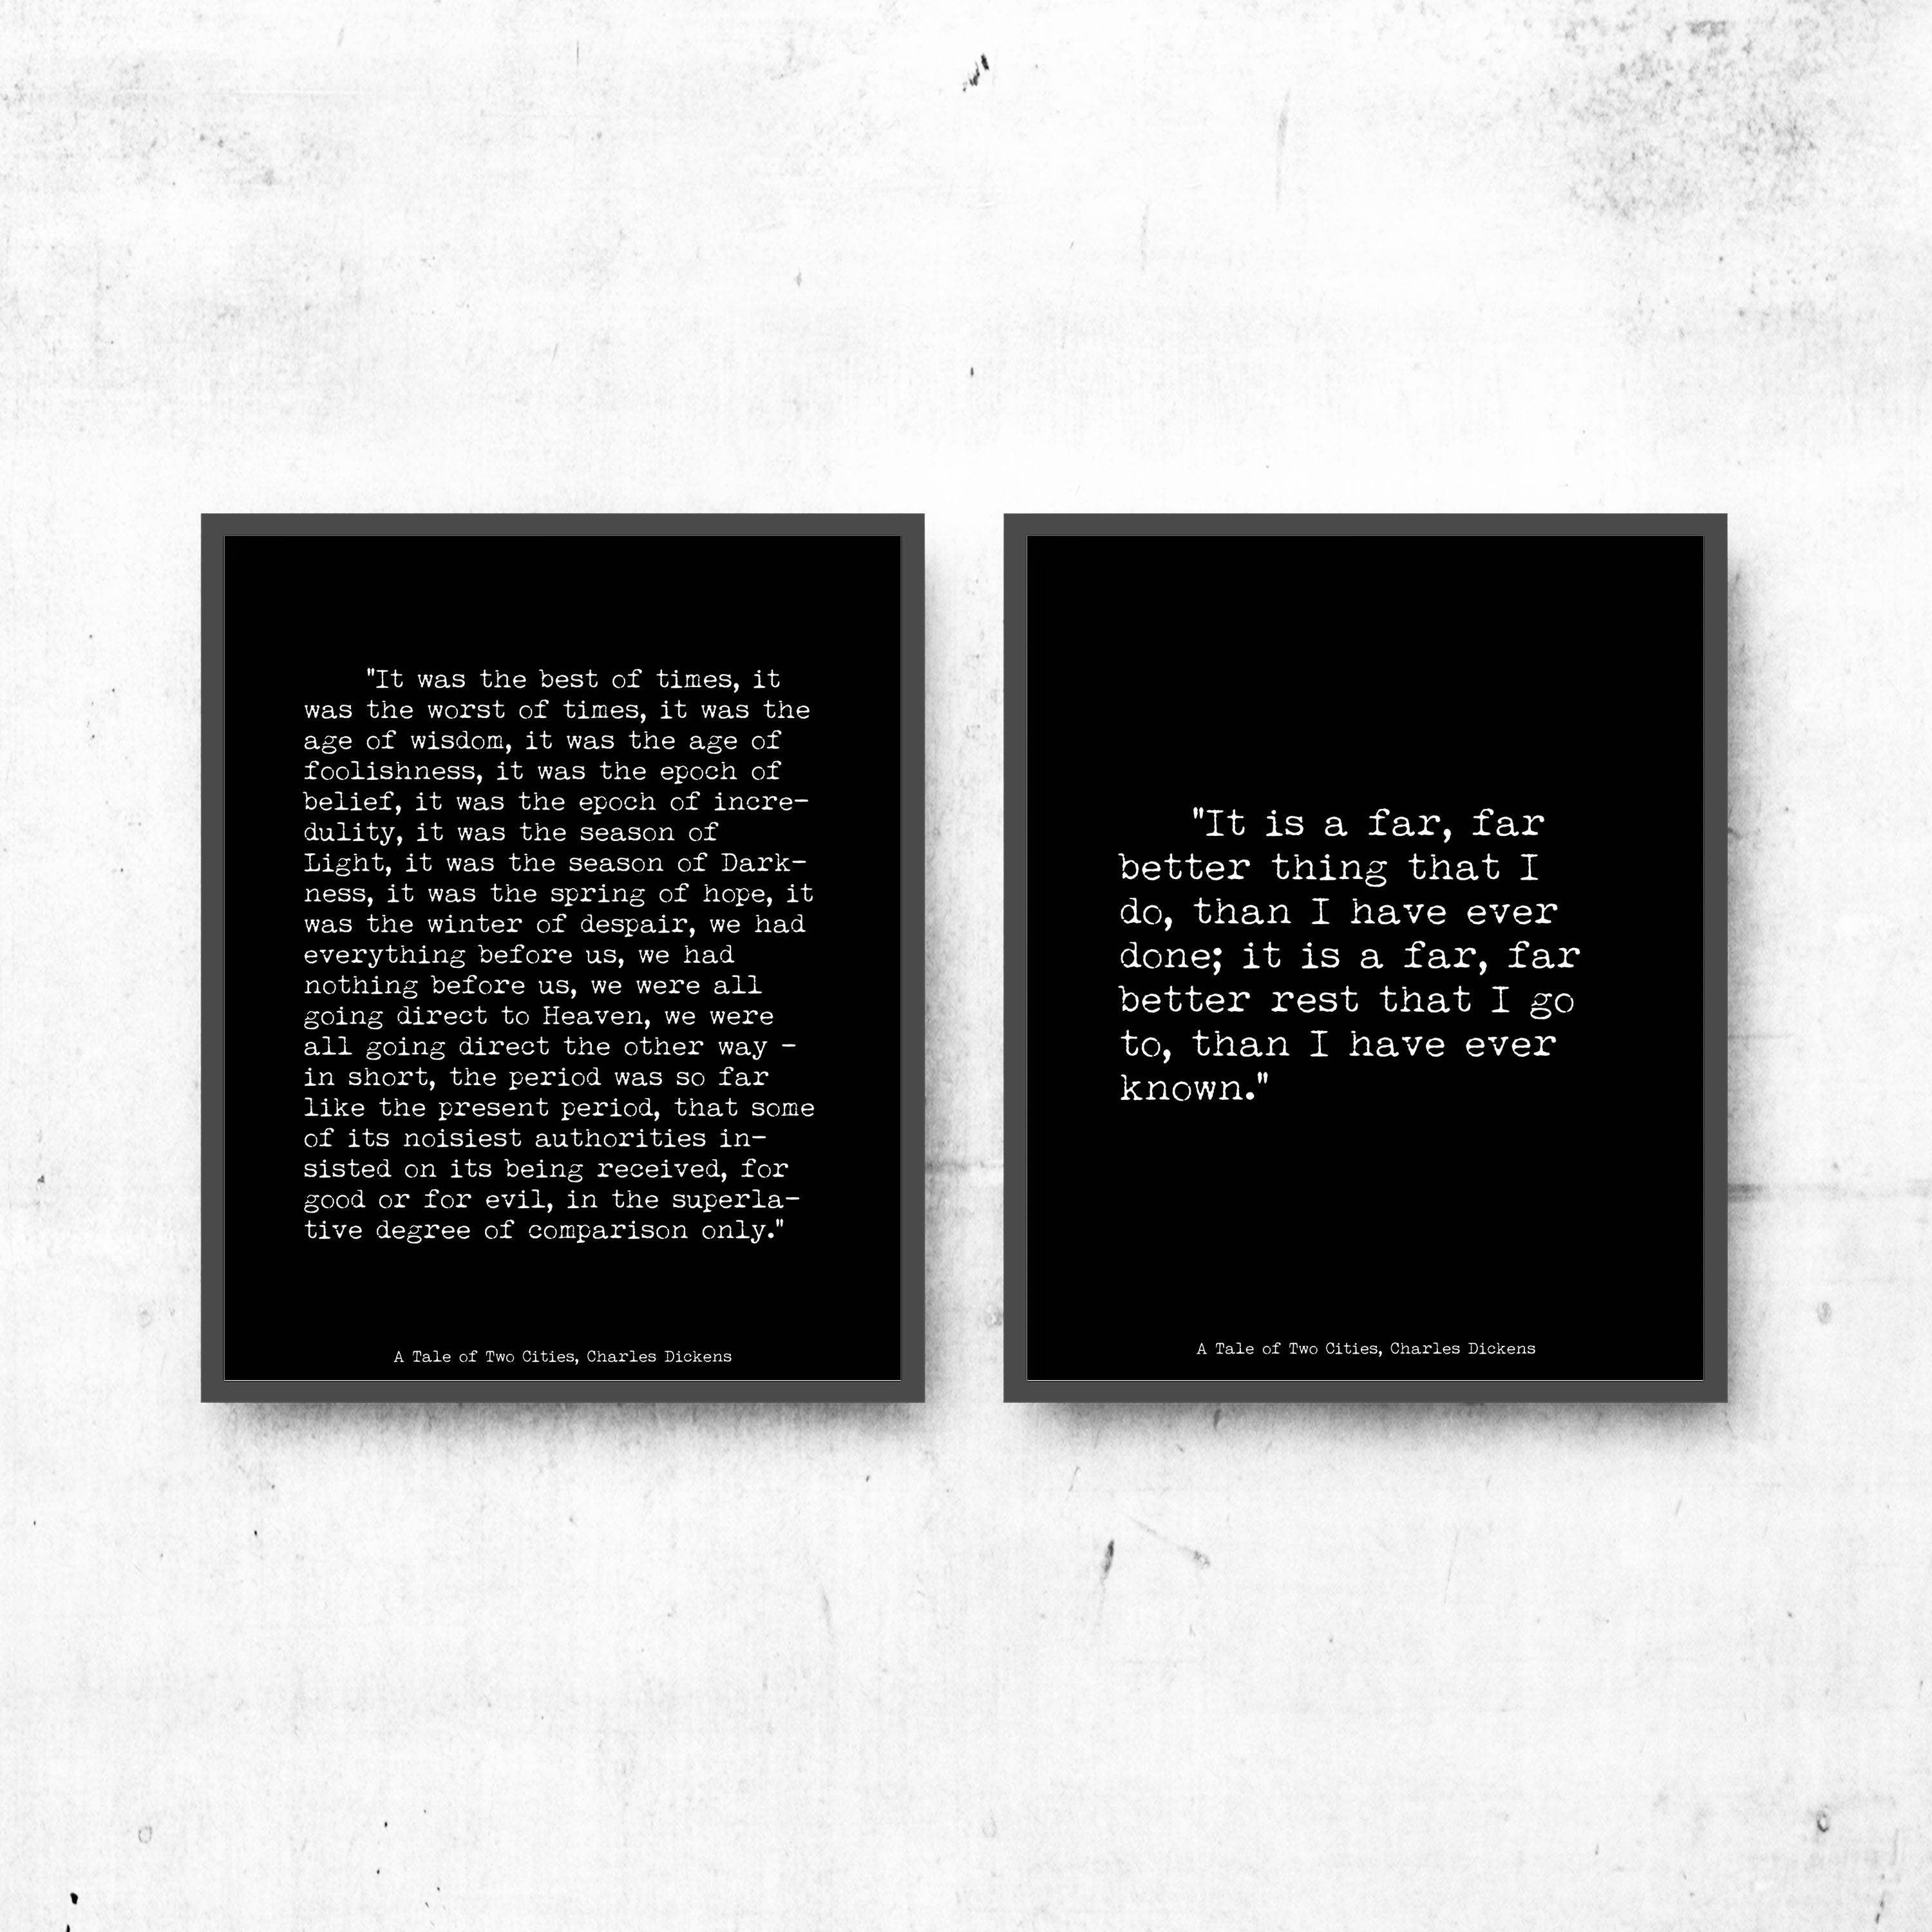 A tale of two cities set of 2 art prints, Charles Dickens opening and closing lines